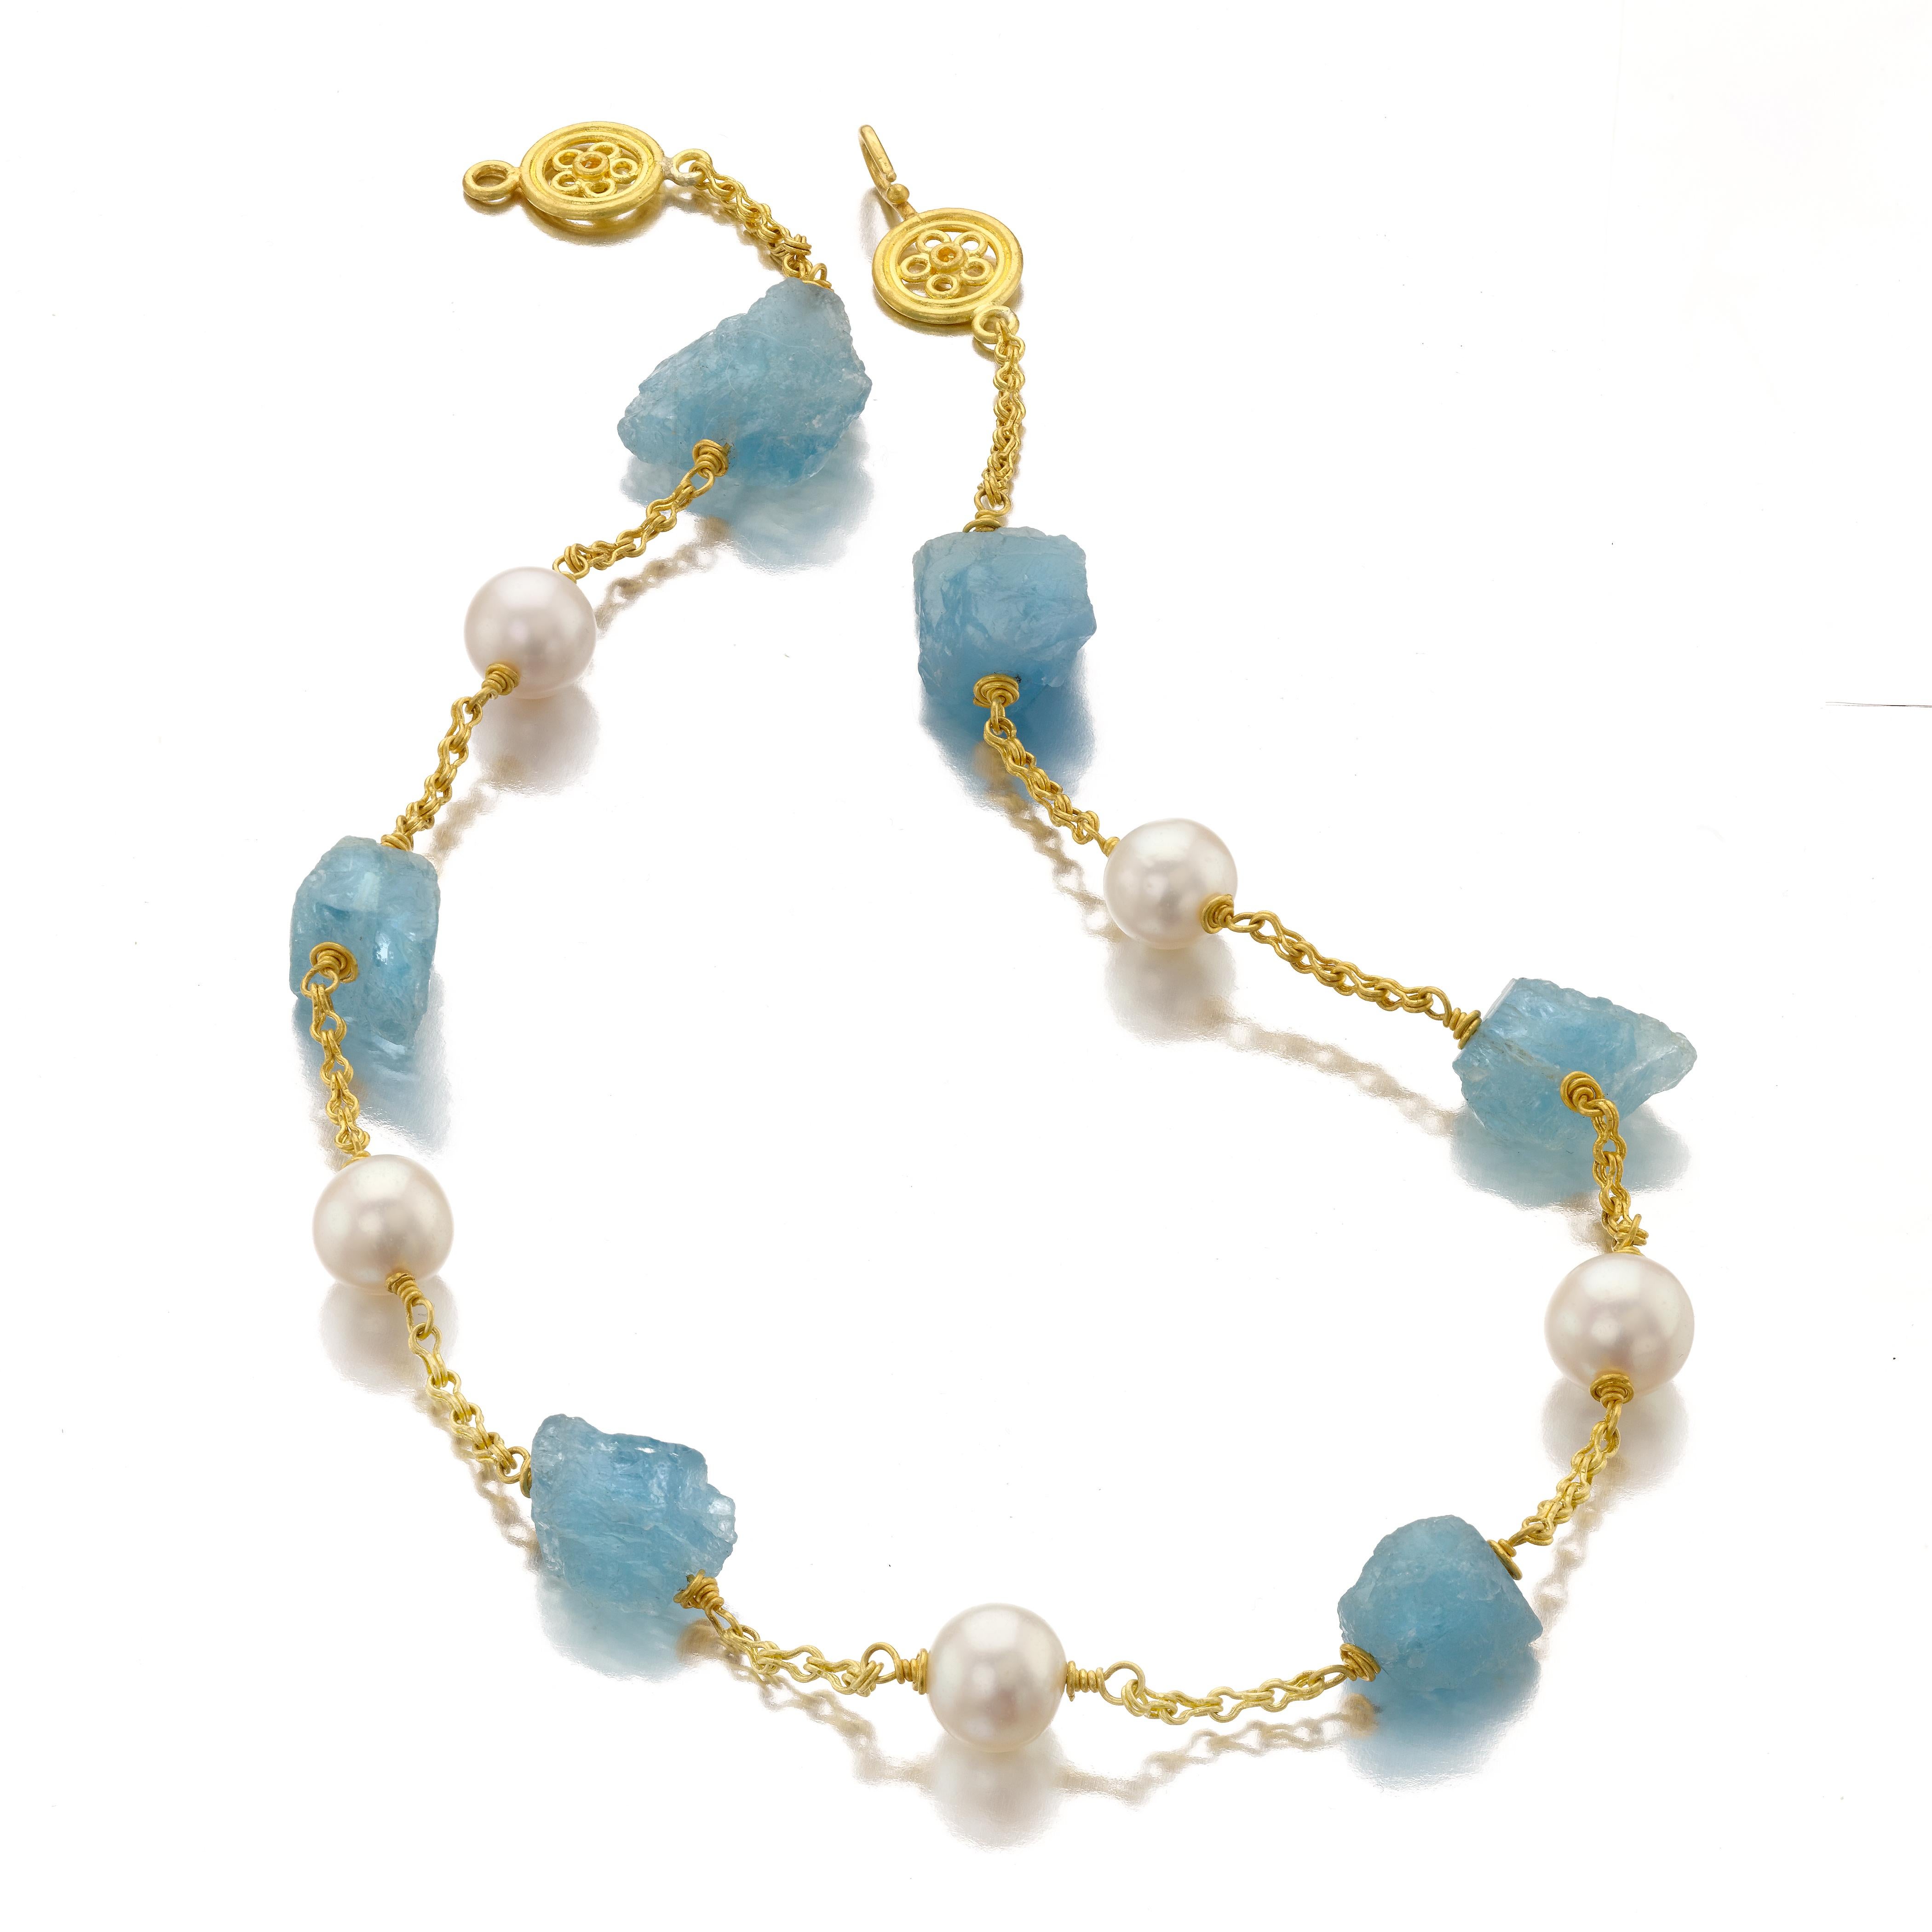 Natural Aquamarine crystals and 10 millimeter round cultured white pearls necklace in high 22 Karat gold with beautiful clasp. Elegant with soft tones, the necklace is an easy wear, going from day to night seamlessly. 
18.5 inches long and is